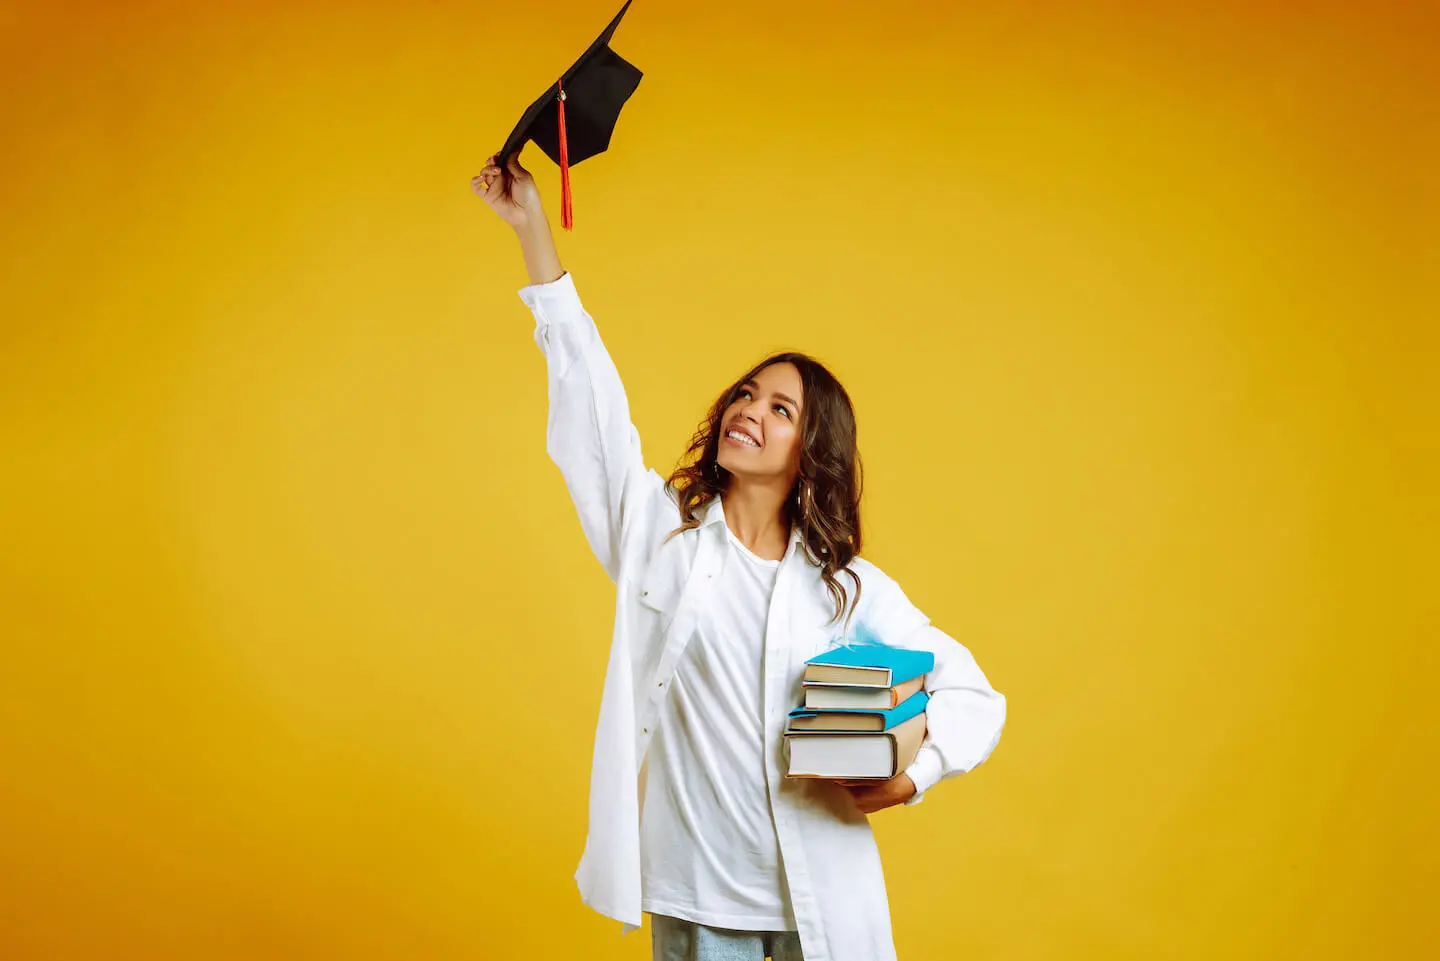 How to prepare for college: student carrying some books and holding a graduation cap